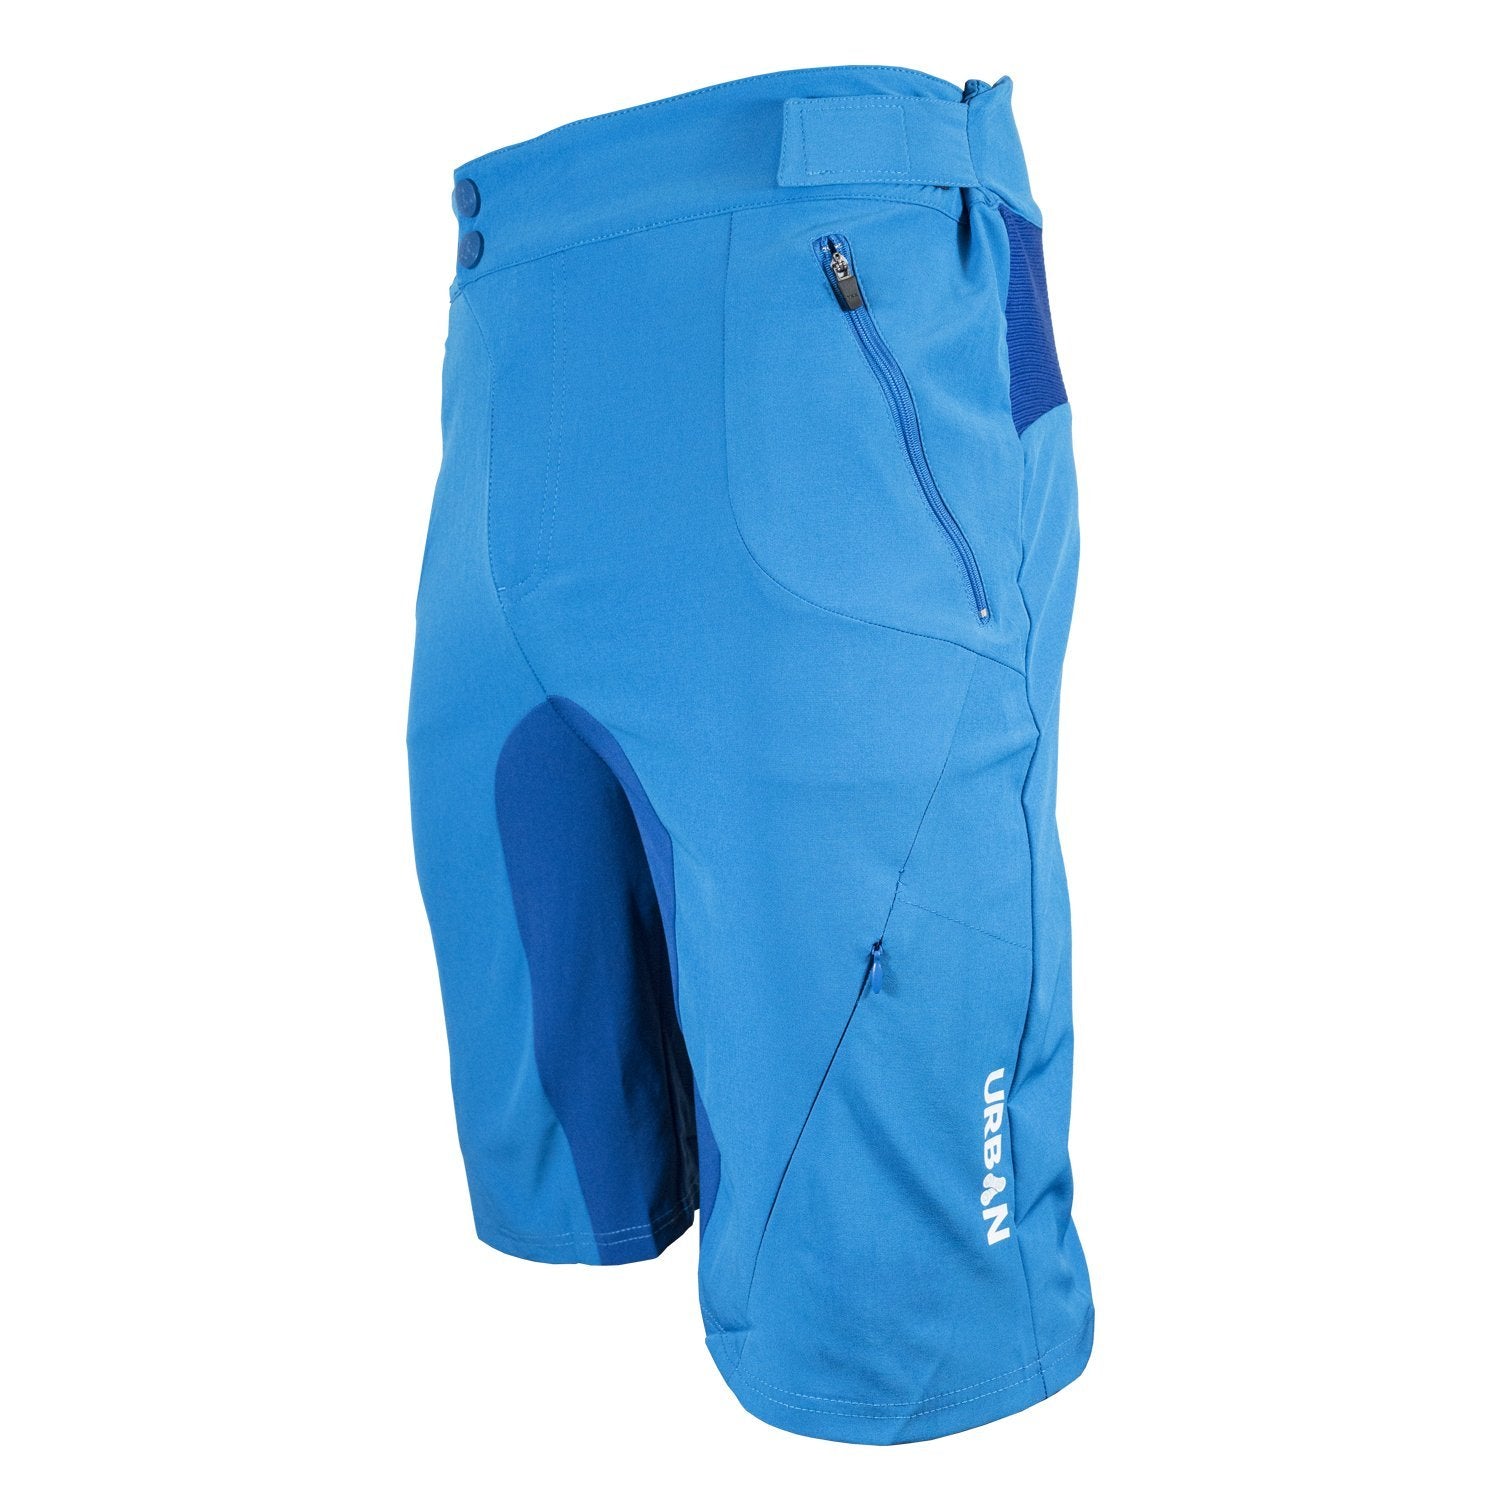 cycling shorts with zip pockets